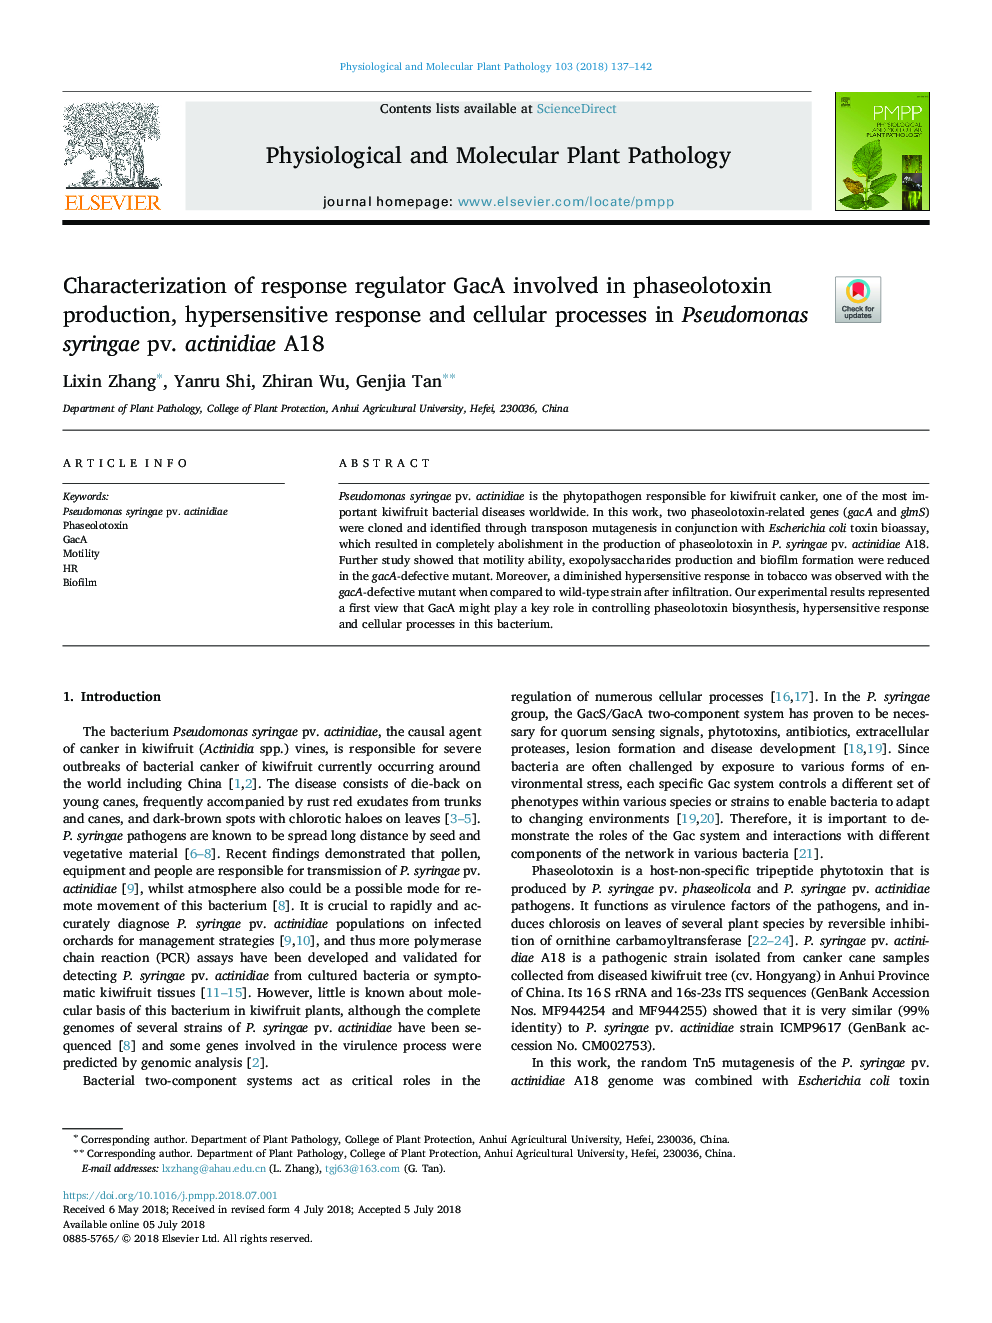 Characterization of response regulator GacA involved in phaseolotoxin production, hypersensitive response and cellular processes in Pseudomonas syringae pv. actinidiae A18